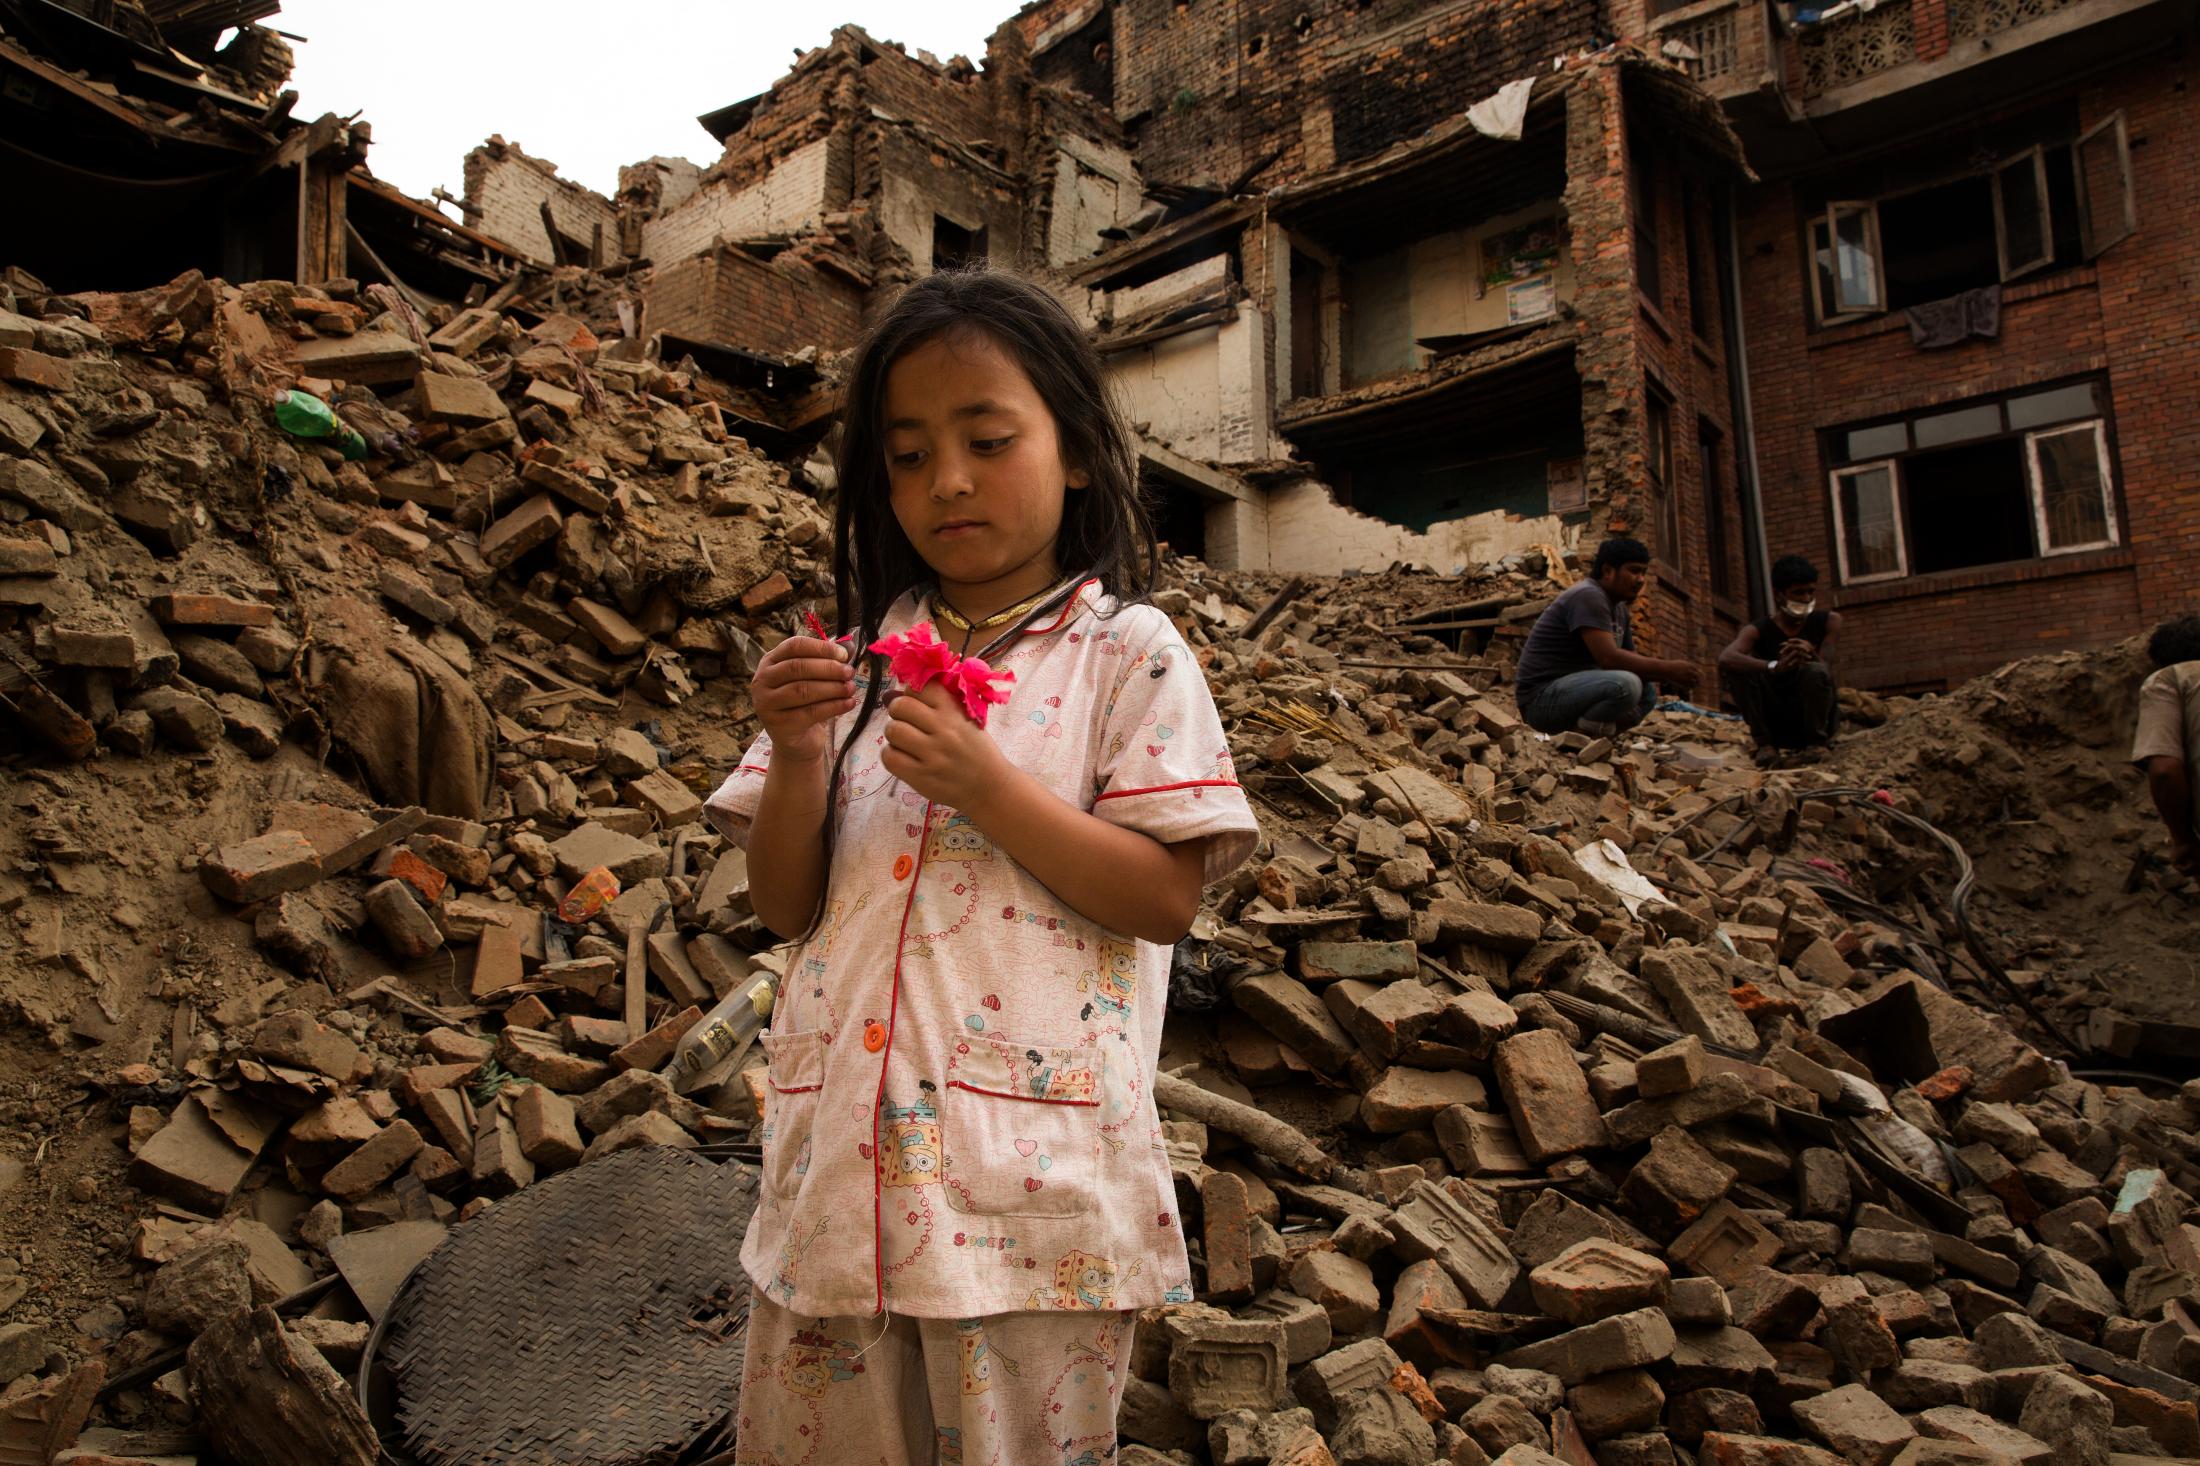 Nepal: A Shattered Country